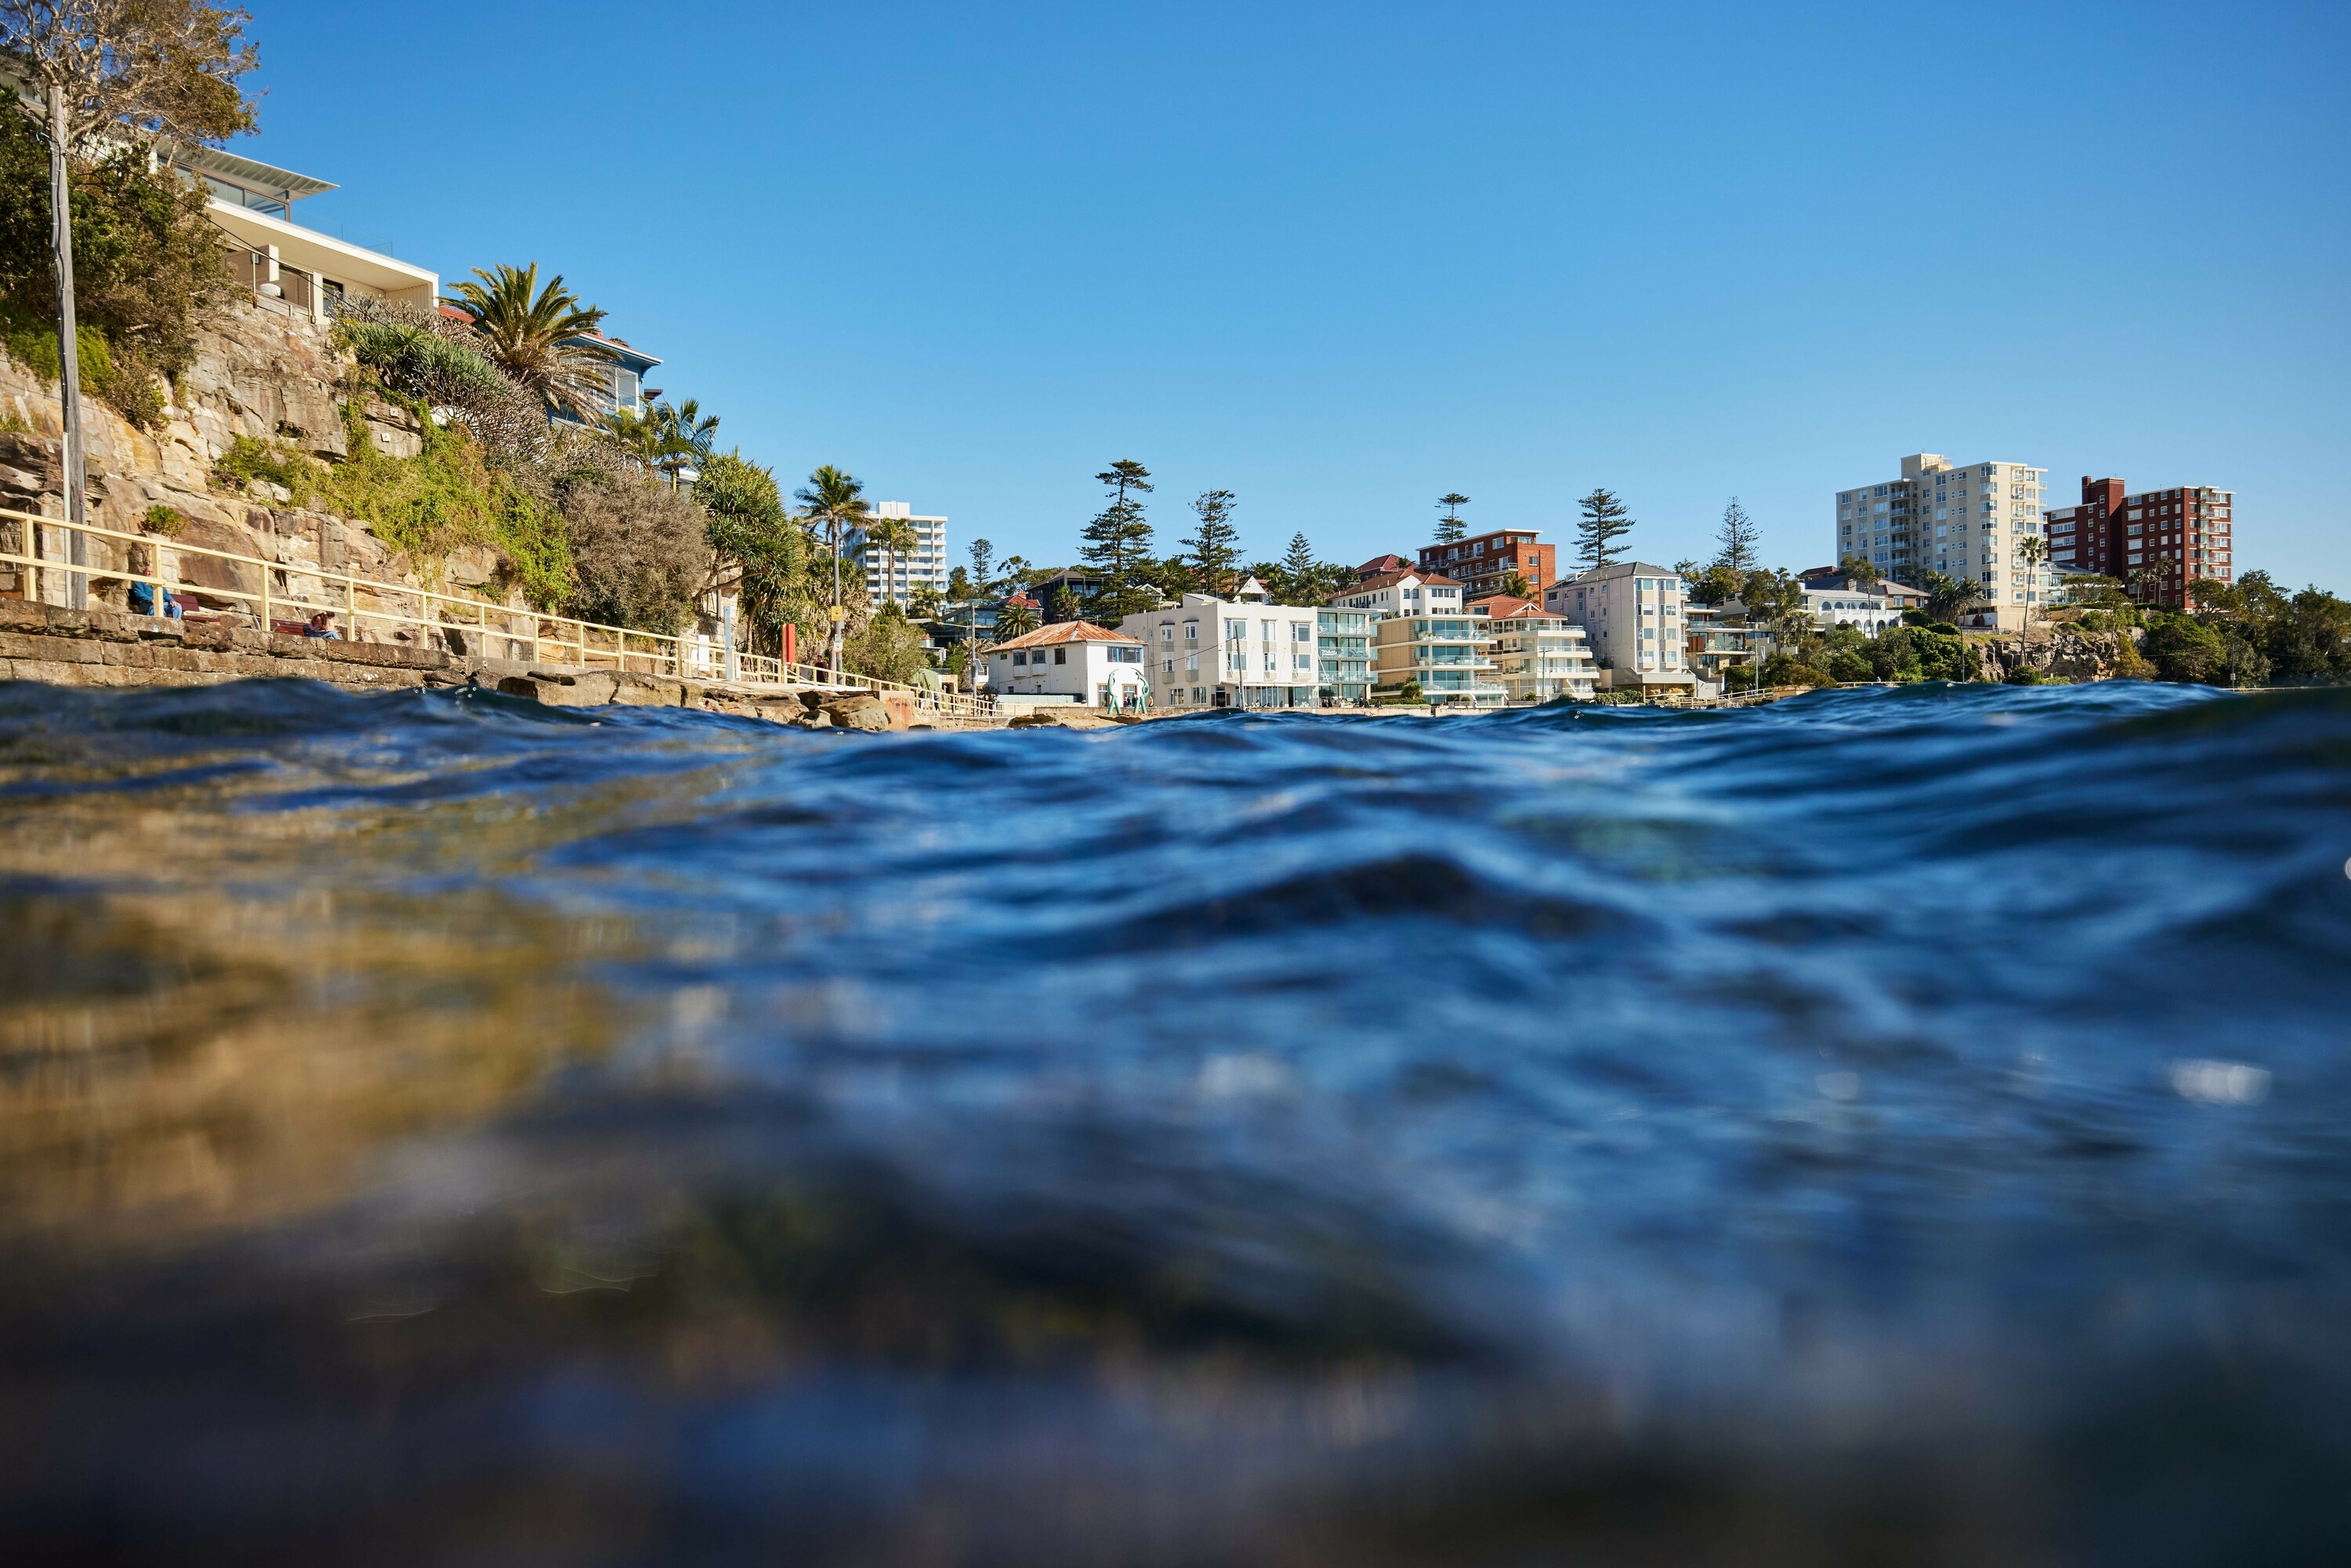 Manly from the ocean